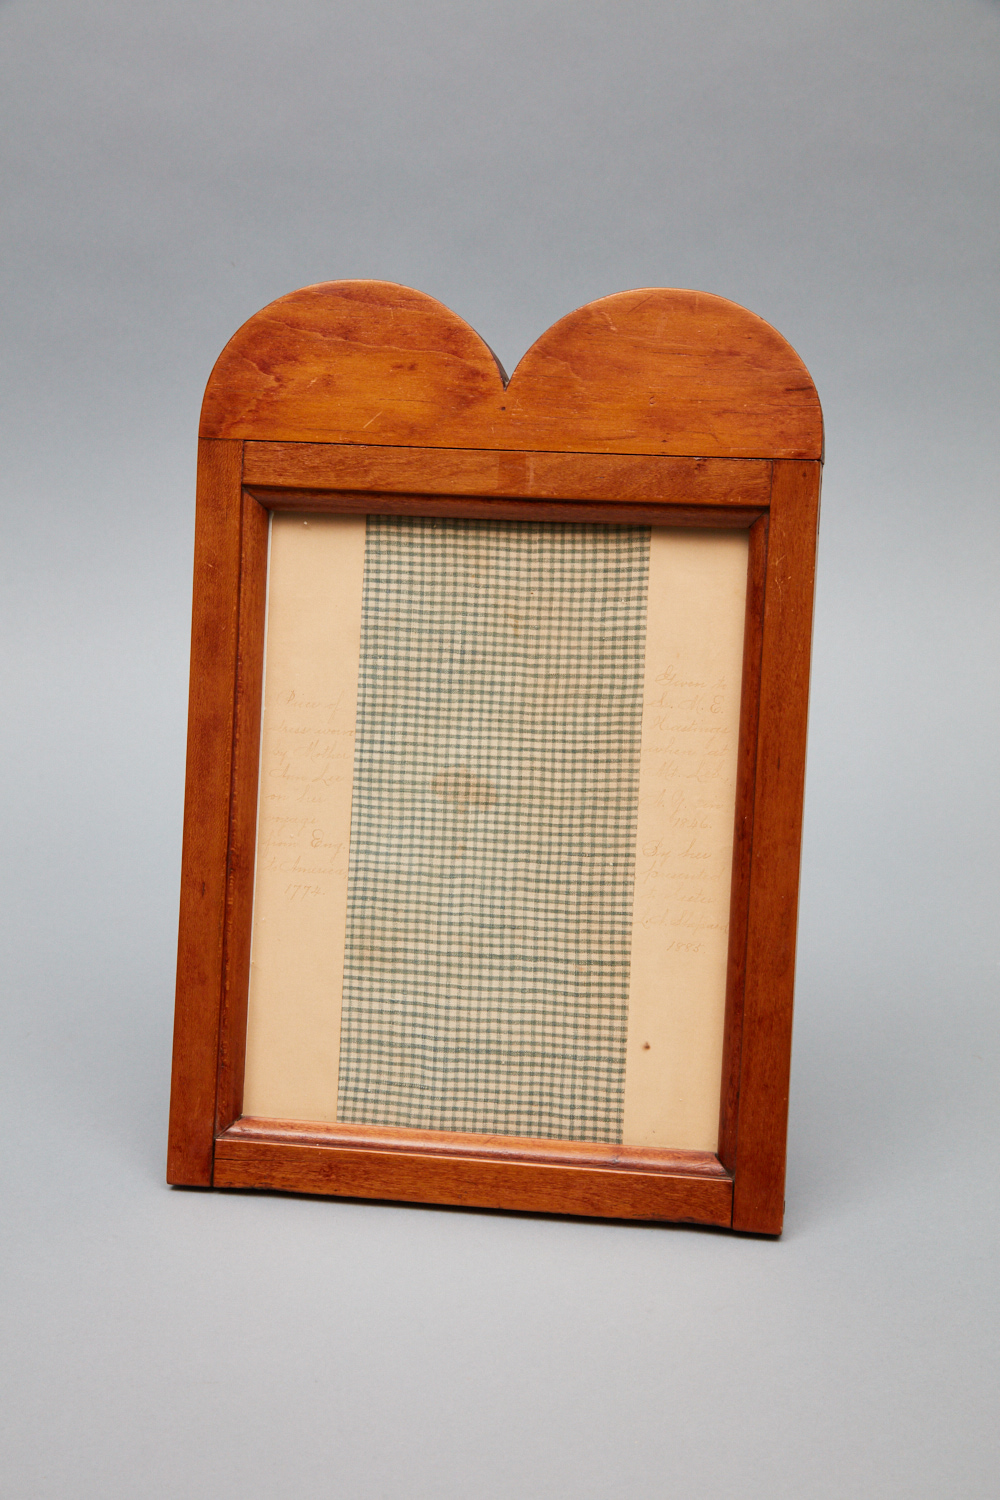 A wooden frame with a checkered pattern.